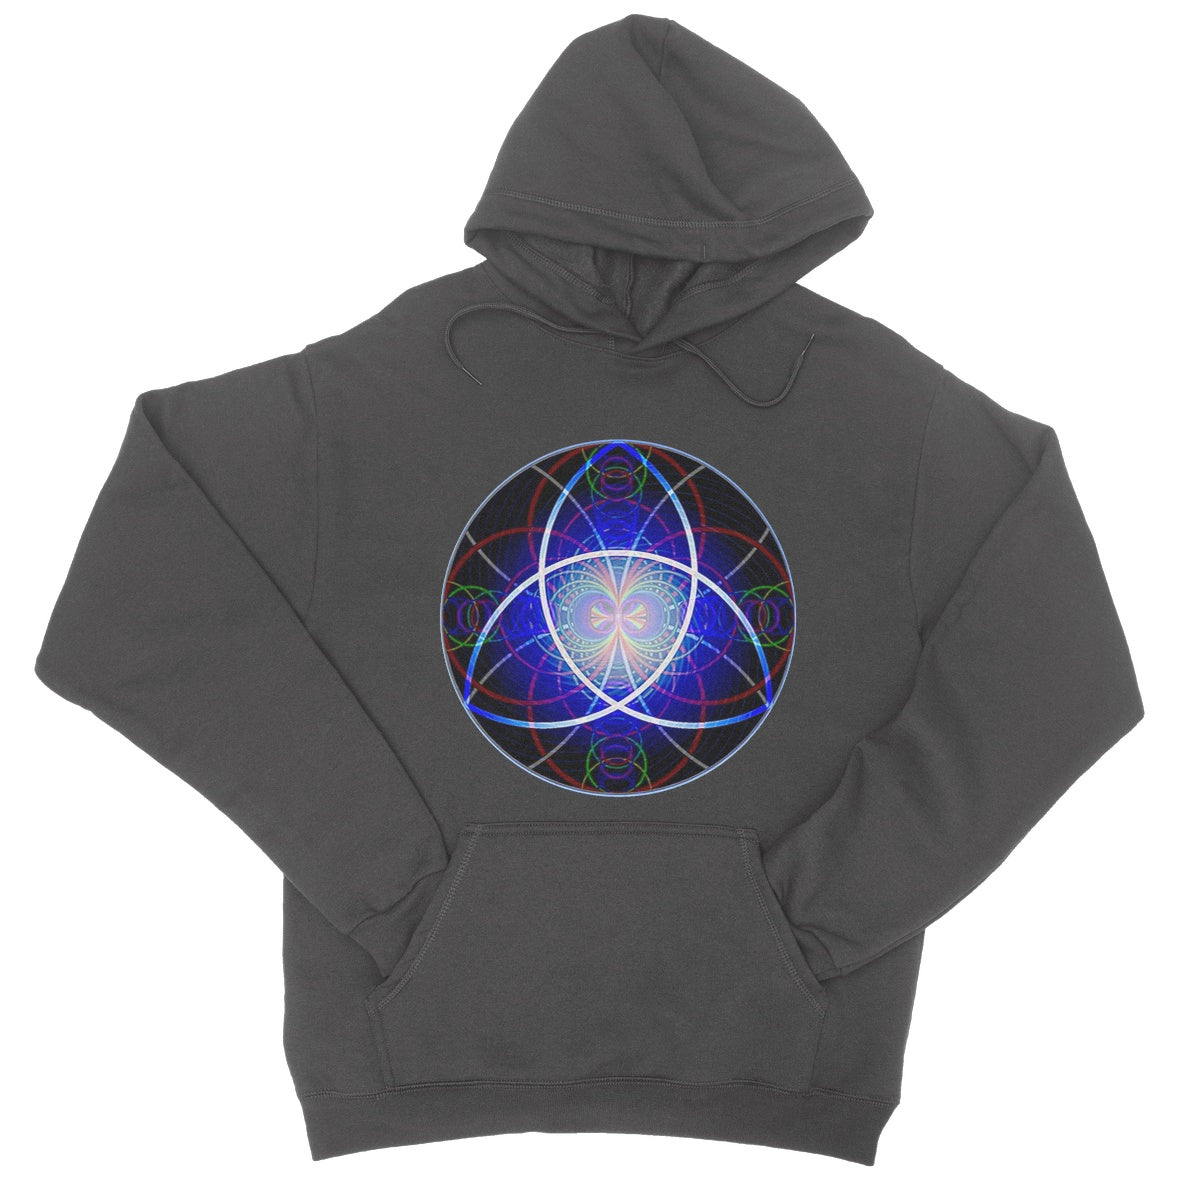 The Triquetra Rainbow Wave print College Hoodie